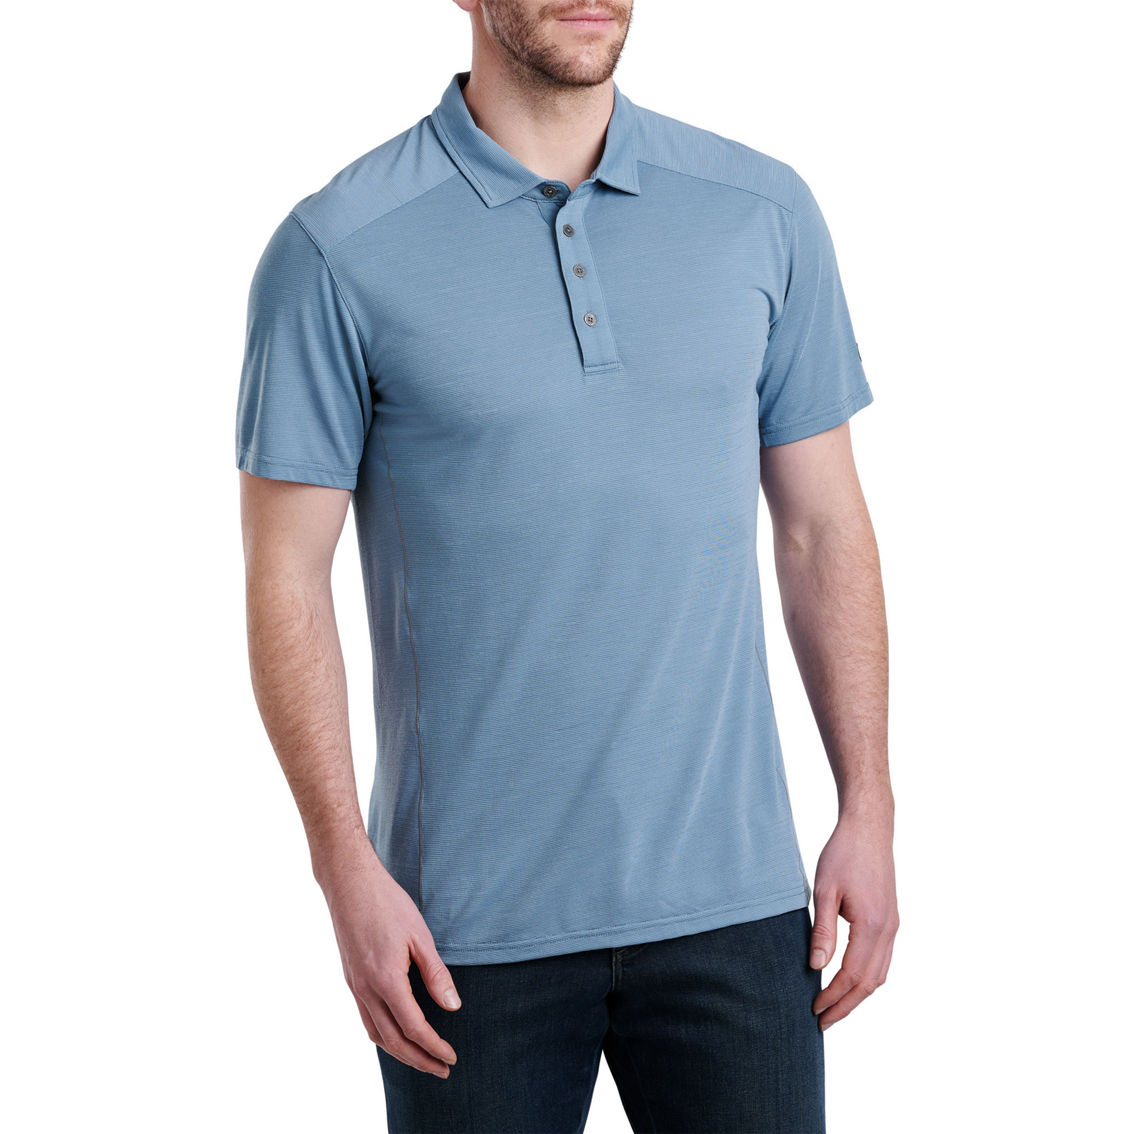 Kuhl Valiant Polo | Shirts | Clothing & Accessories | Shop The Exchange